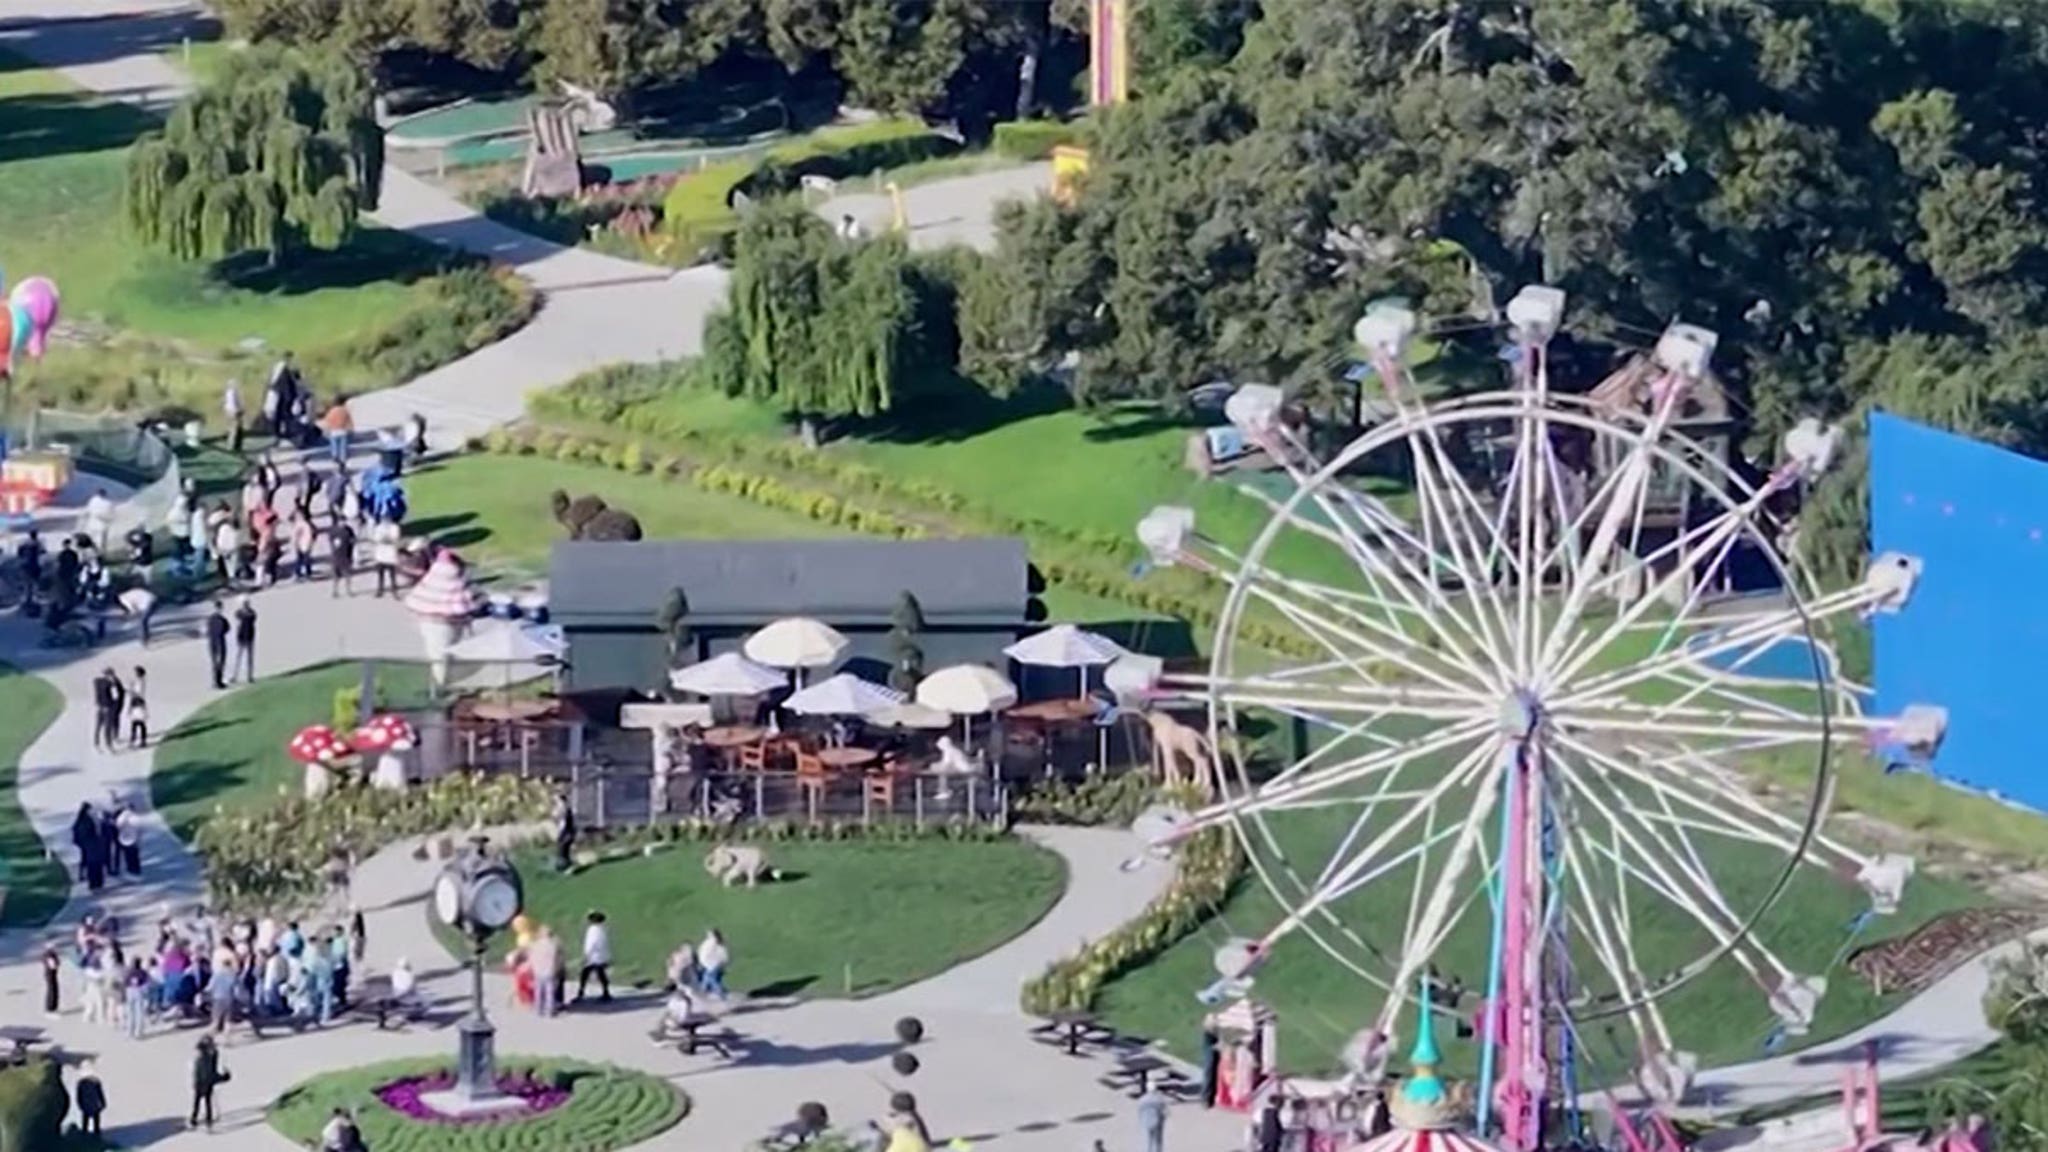 Michael Jackson’s Neverland Ranch Restored For Biopic Filming